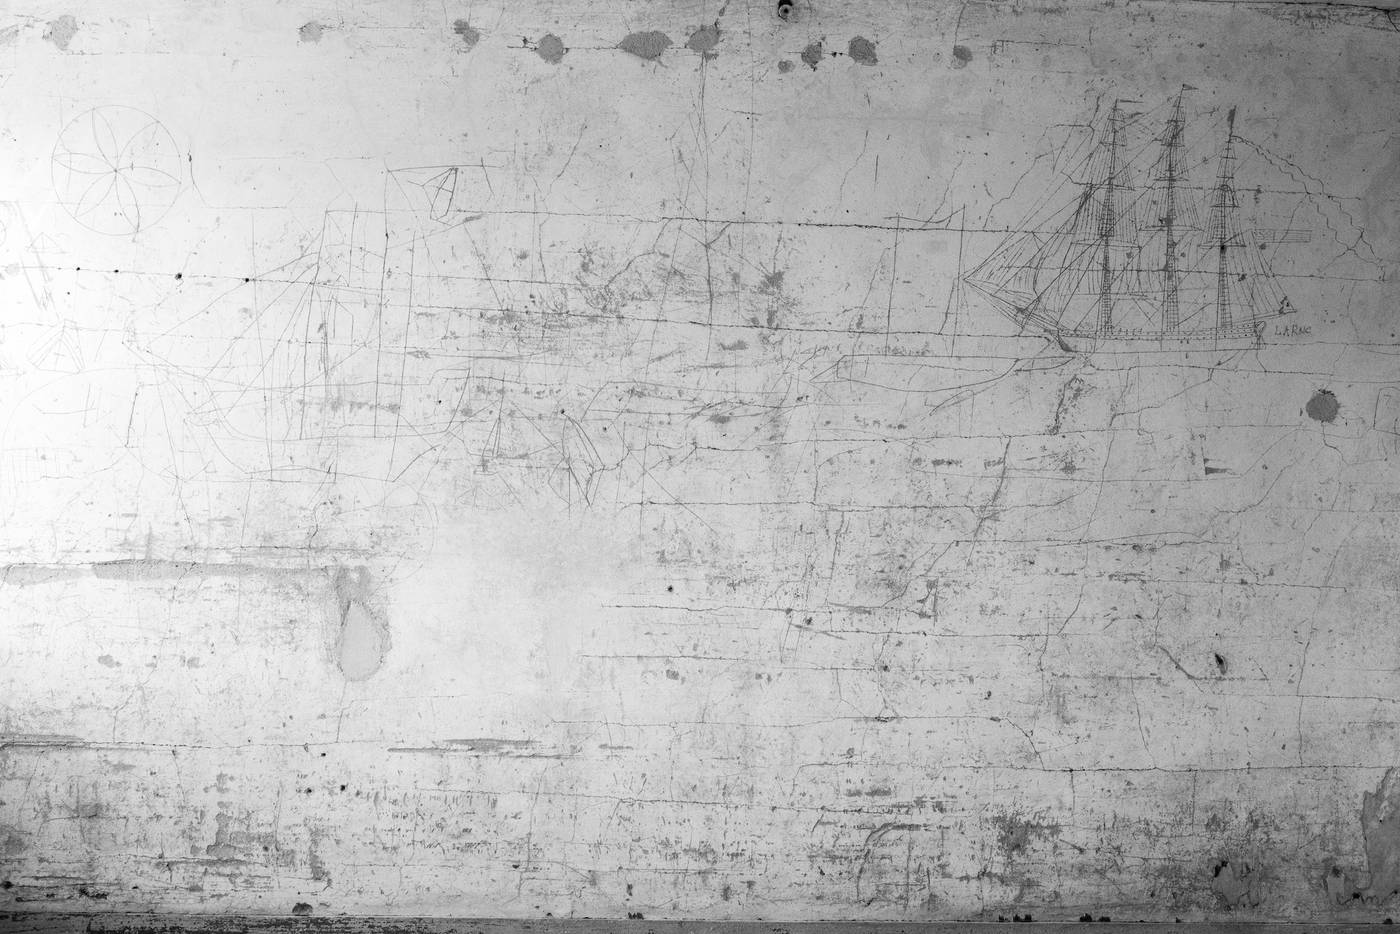 Drawing of old ship hanging on wall